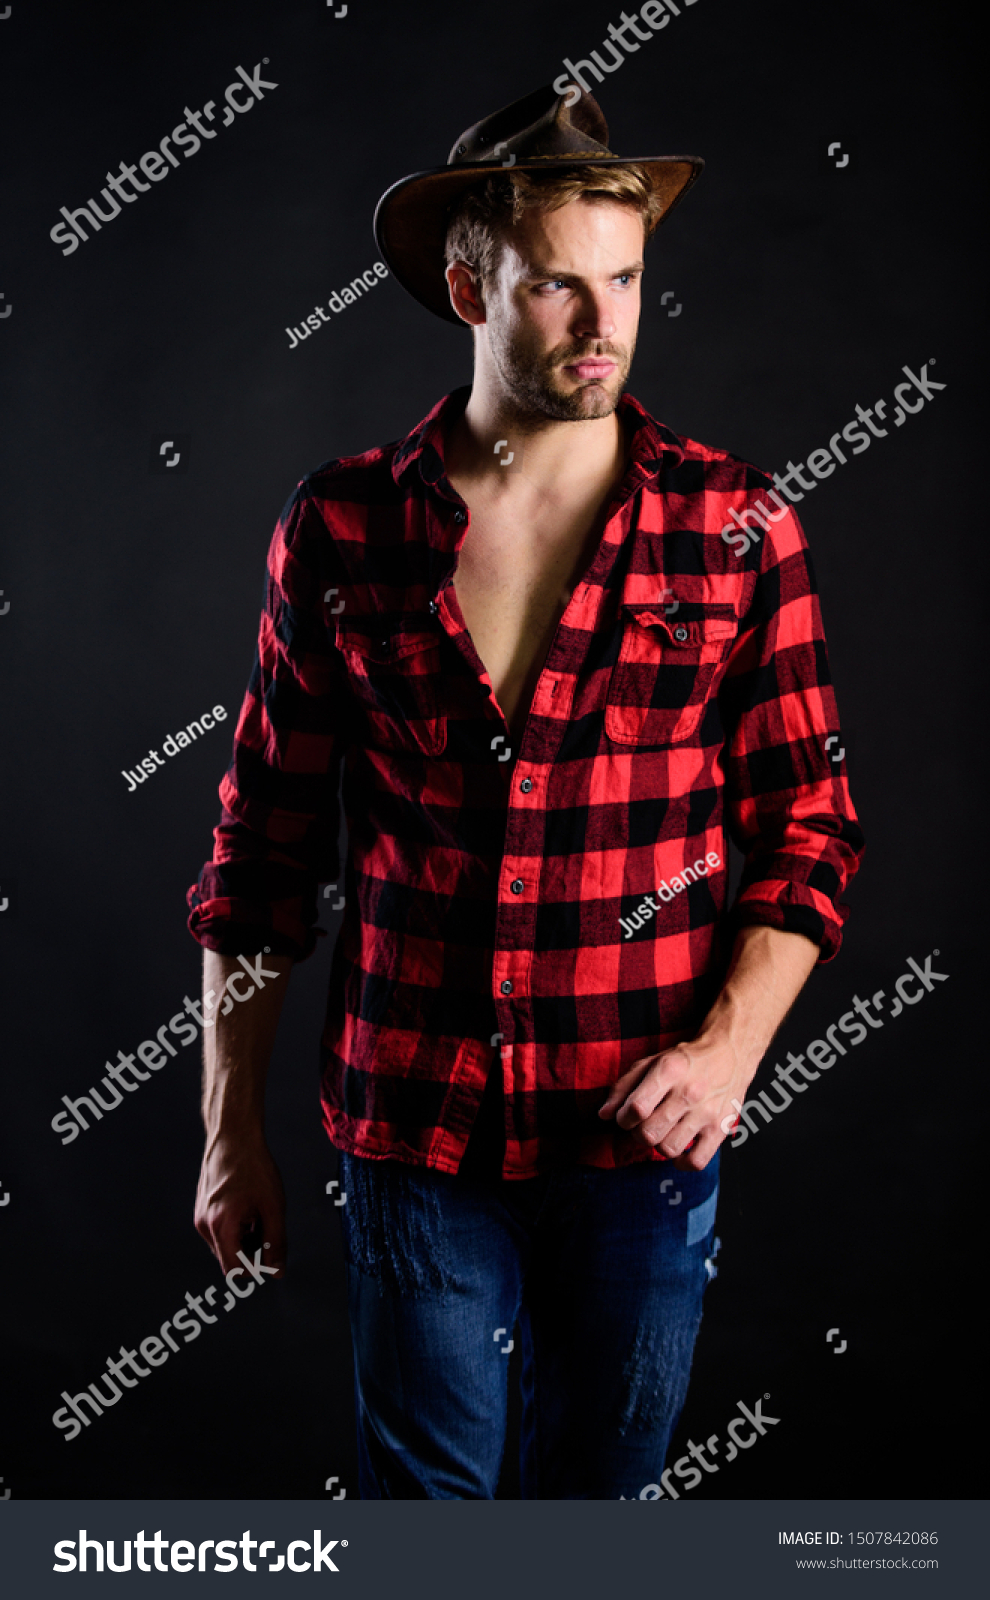 Masculine ideal. Masculinity and brutality concept. Cowboy life came to be highly romanticized. Adopt cowboy mannerisms as a fashion pose. Man unshaven cowboy black background. Western life. #1507842086